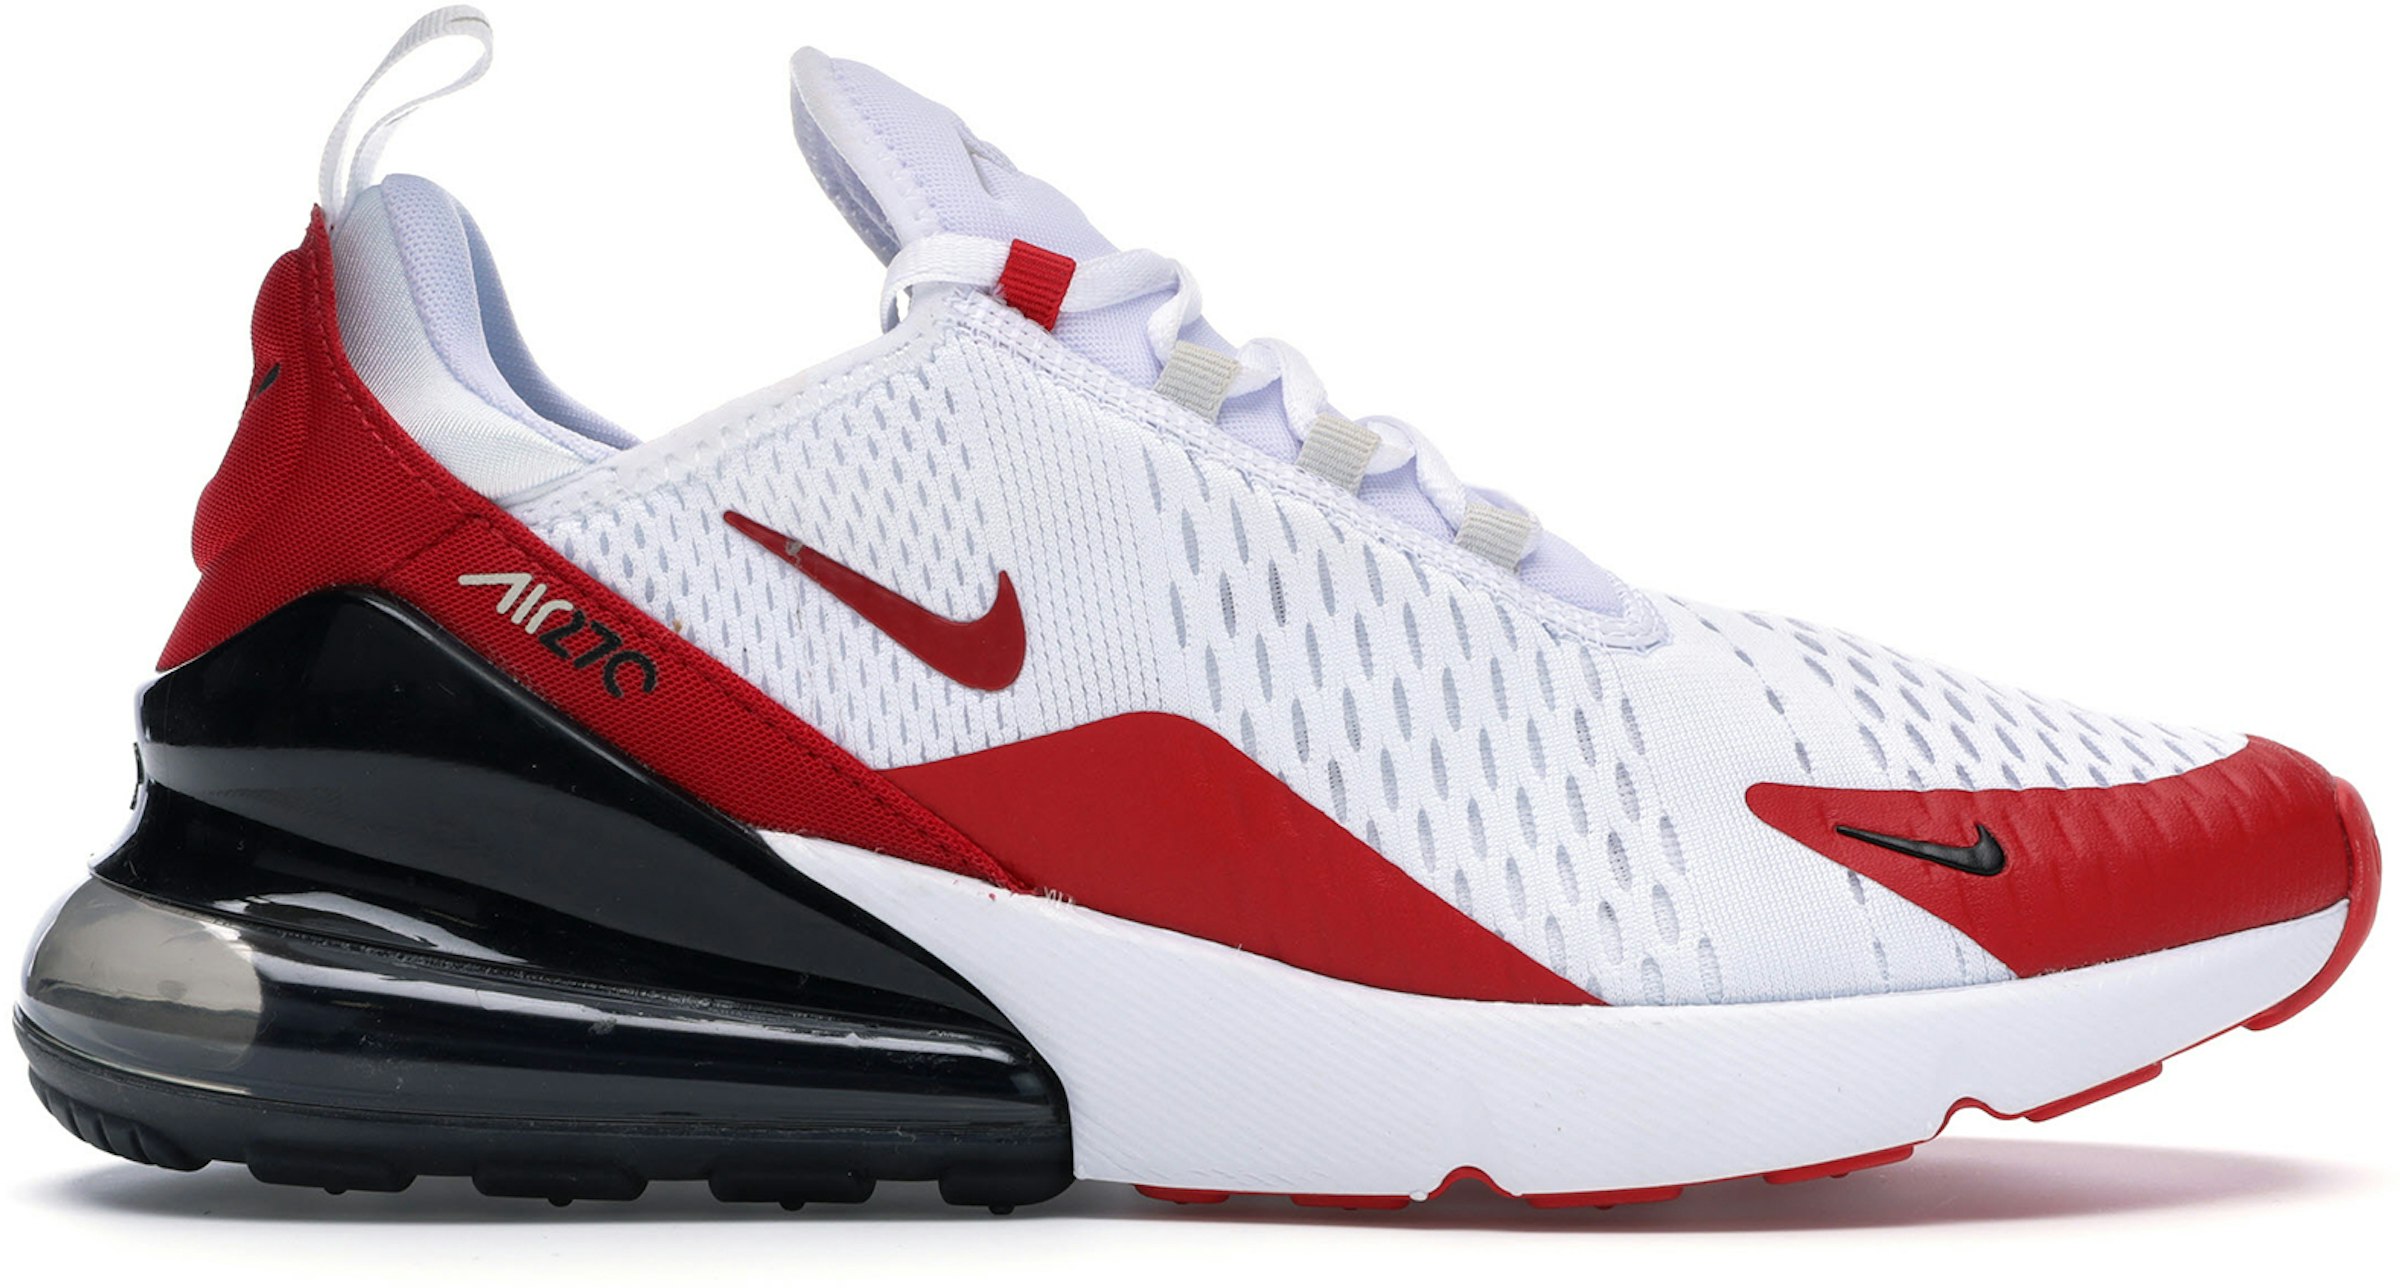 Nike Air Max 270 White Anthracite Red - CJ0550-100 - US